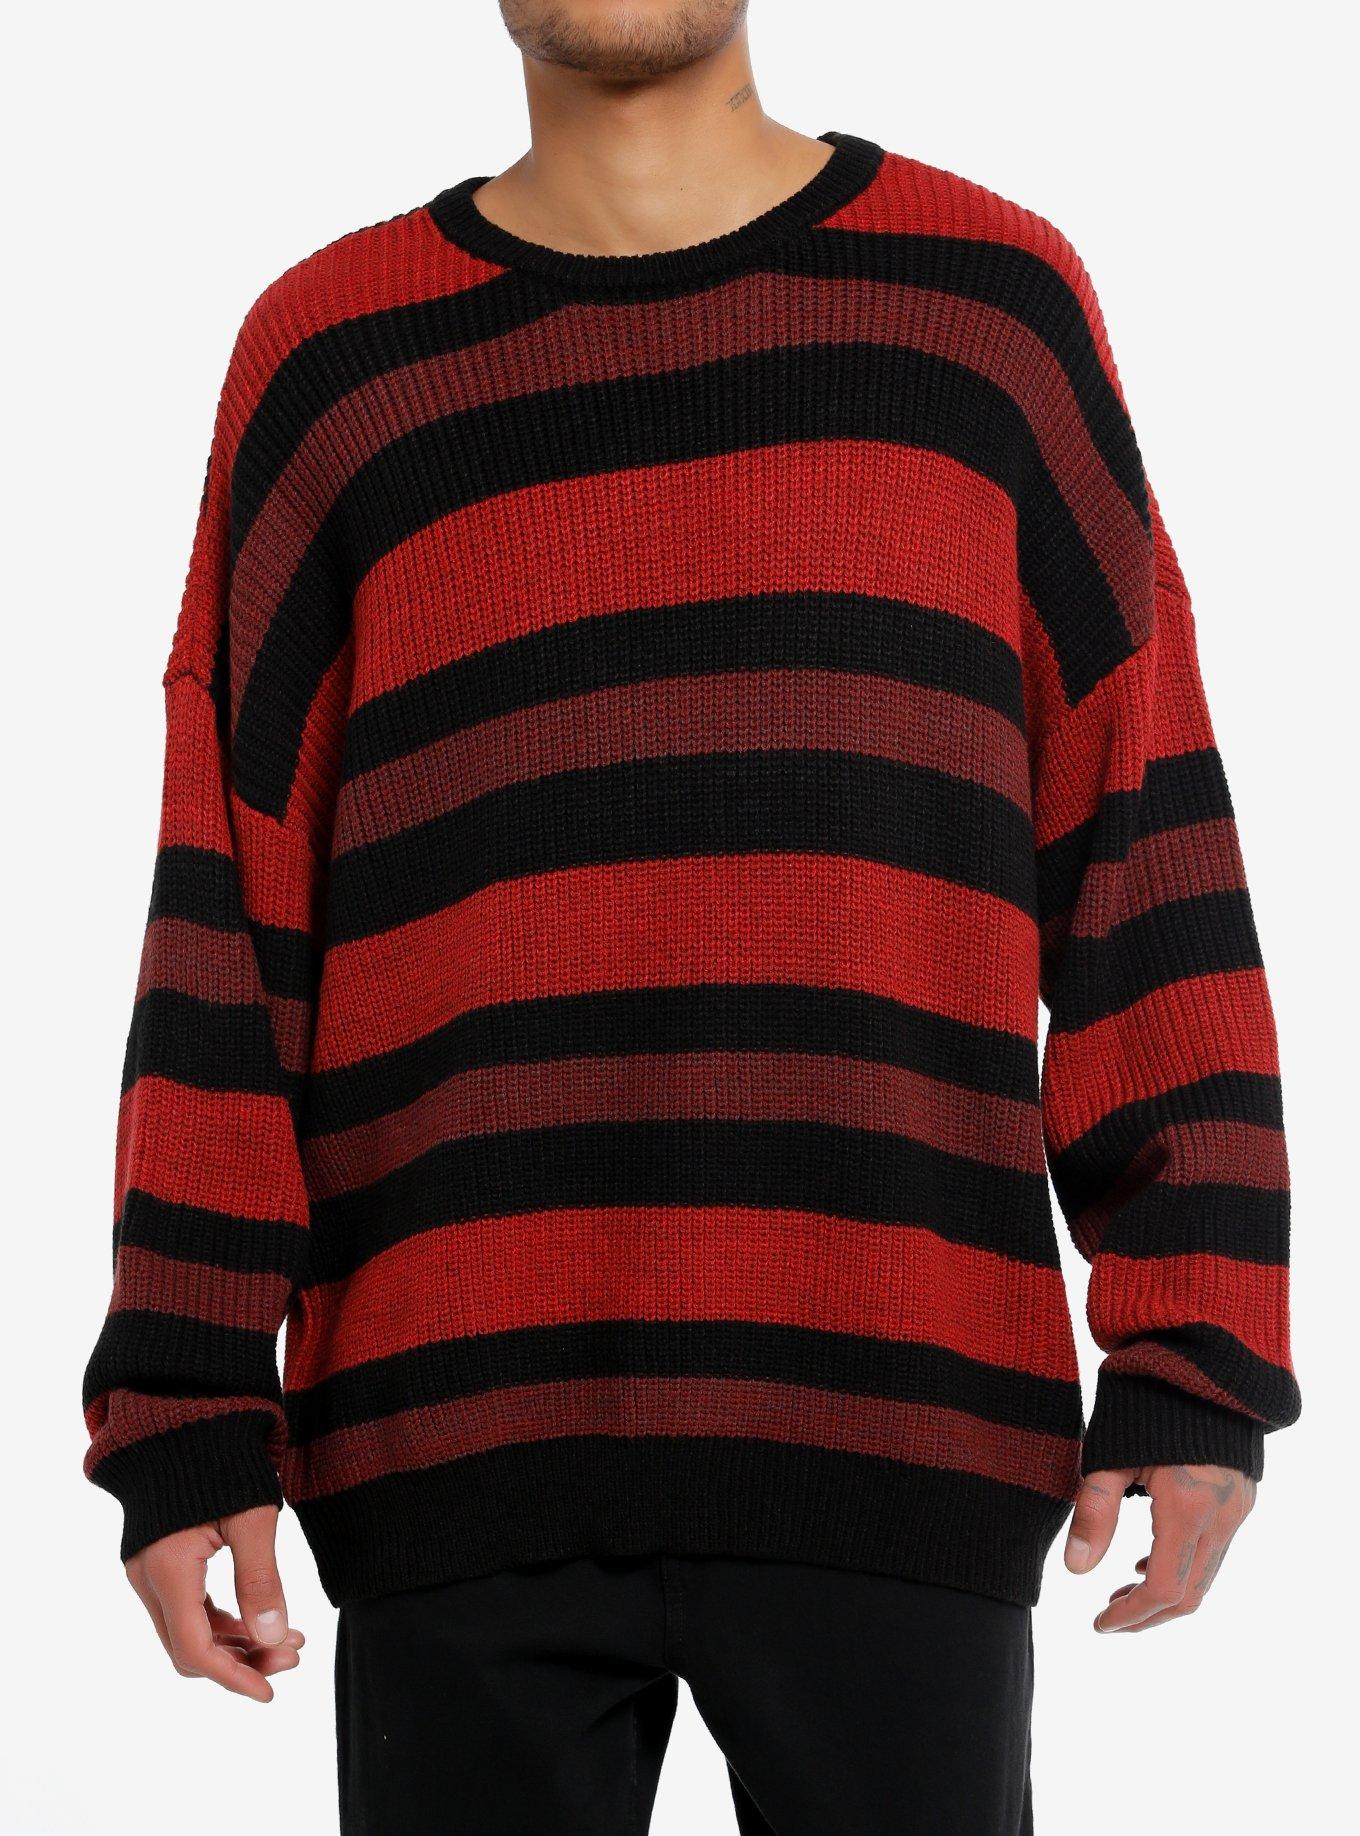 Thorn & Fable™ Red Maroon Black Stripe Knit Sweater